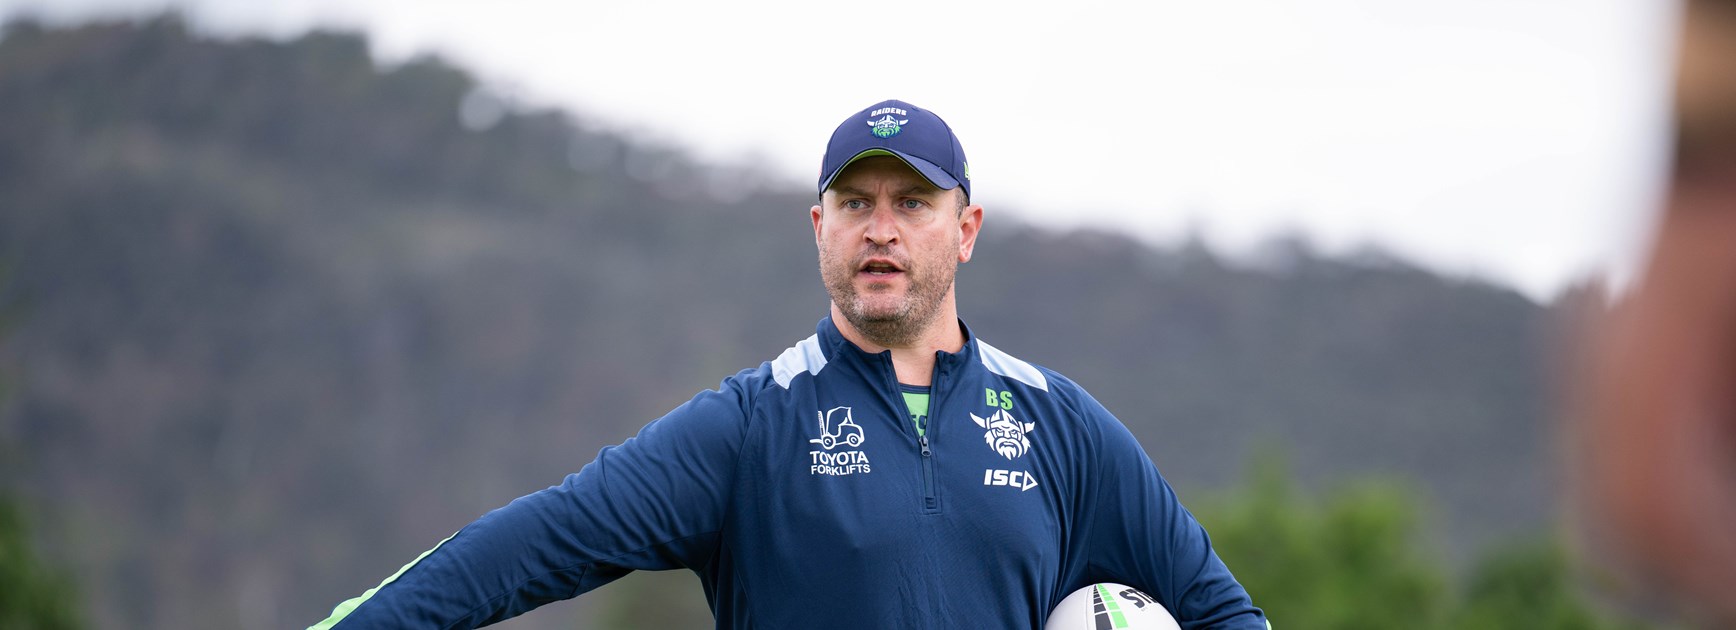 Brock Shepperd joins Raiders as NSW Cup Coach